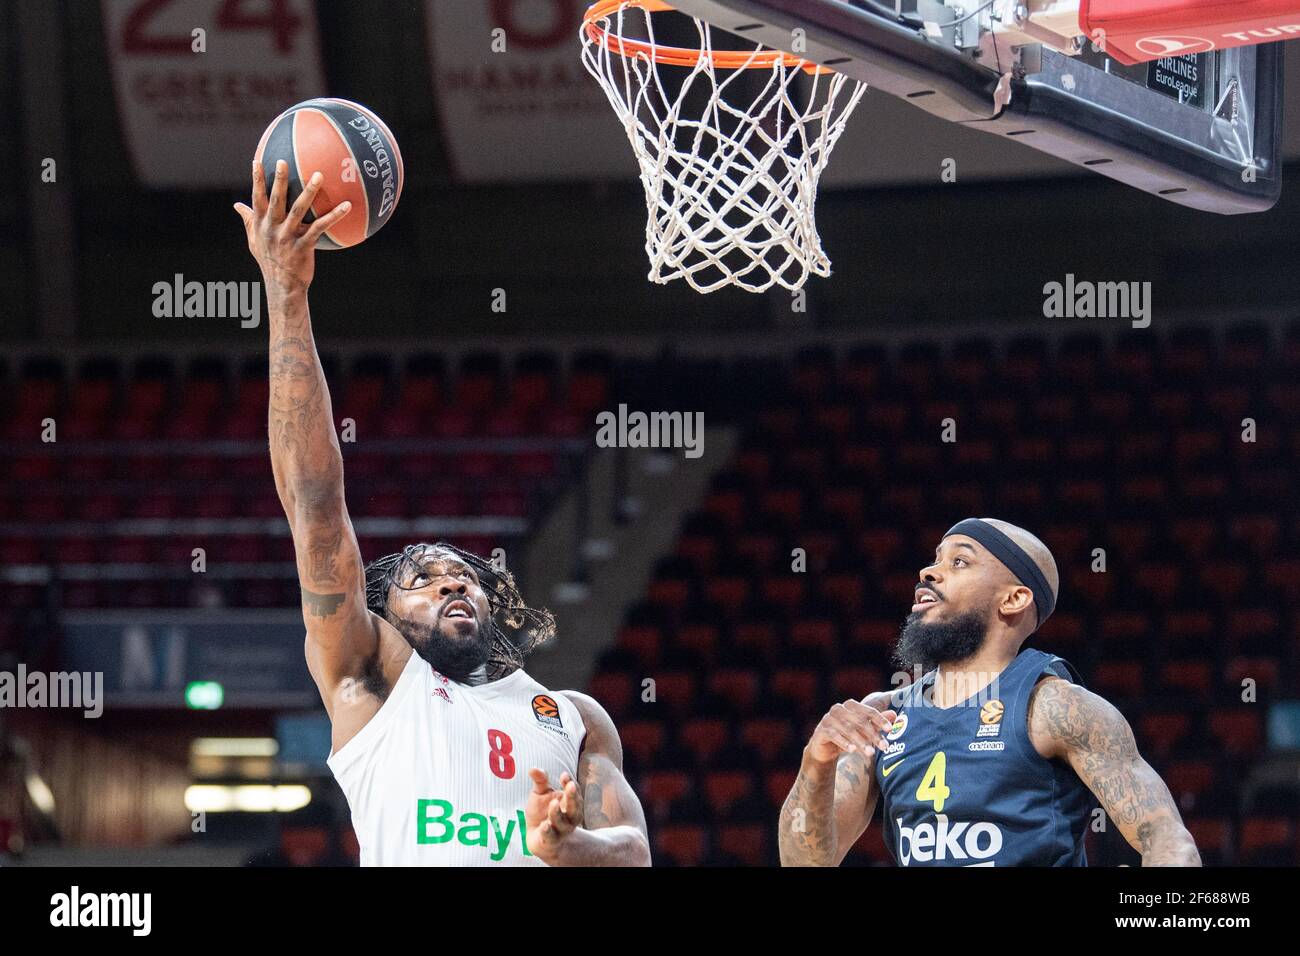 Munich, Germany. 30th Mar, 2021. Basketball: Euroleague, FC Bayern München  - Fenerbahce Istanbul at the Audi Dome. Jalen Reynolds of Bayern Munich (l)  shoots at the basket. On the right Lorenzo Brown